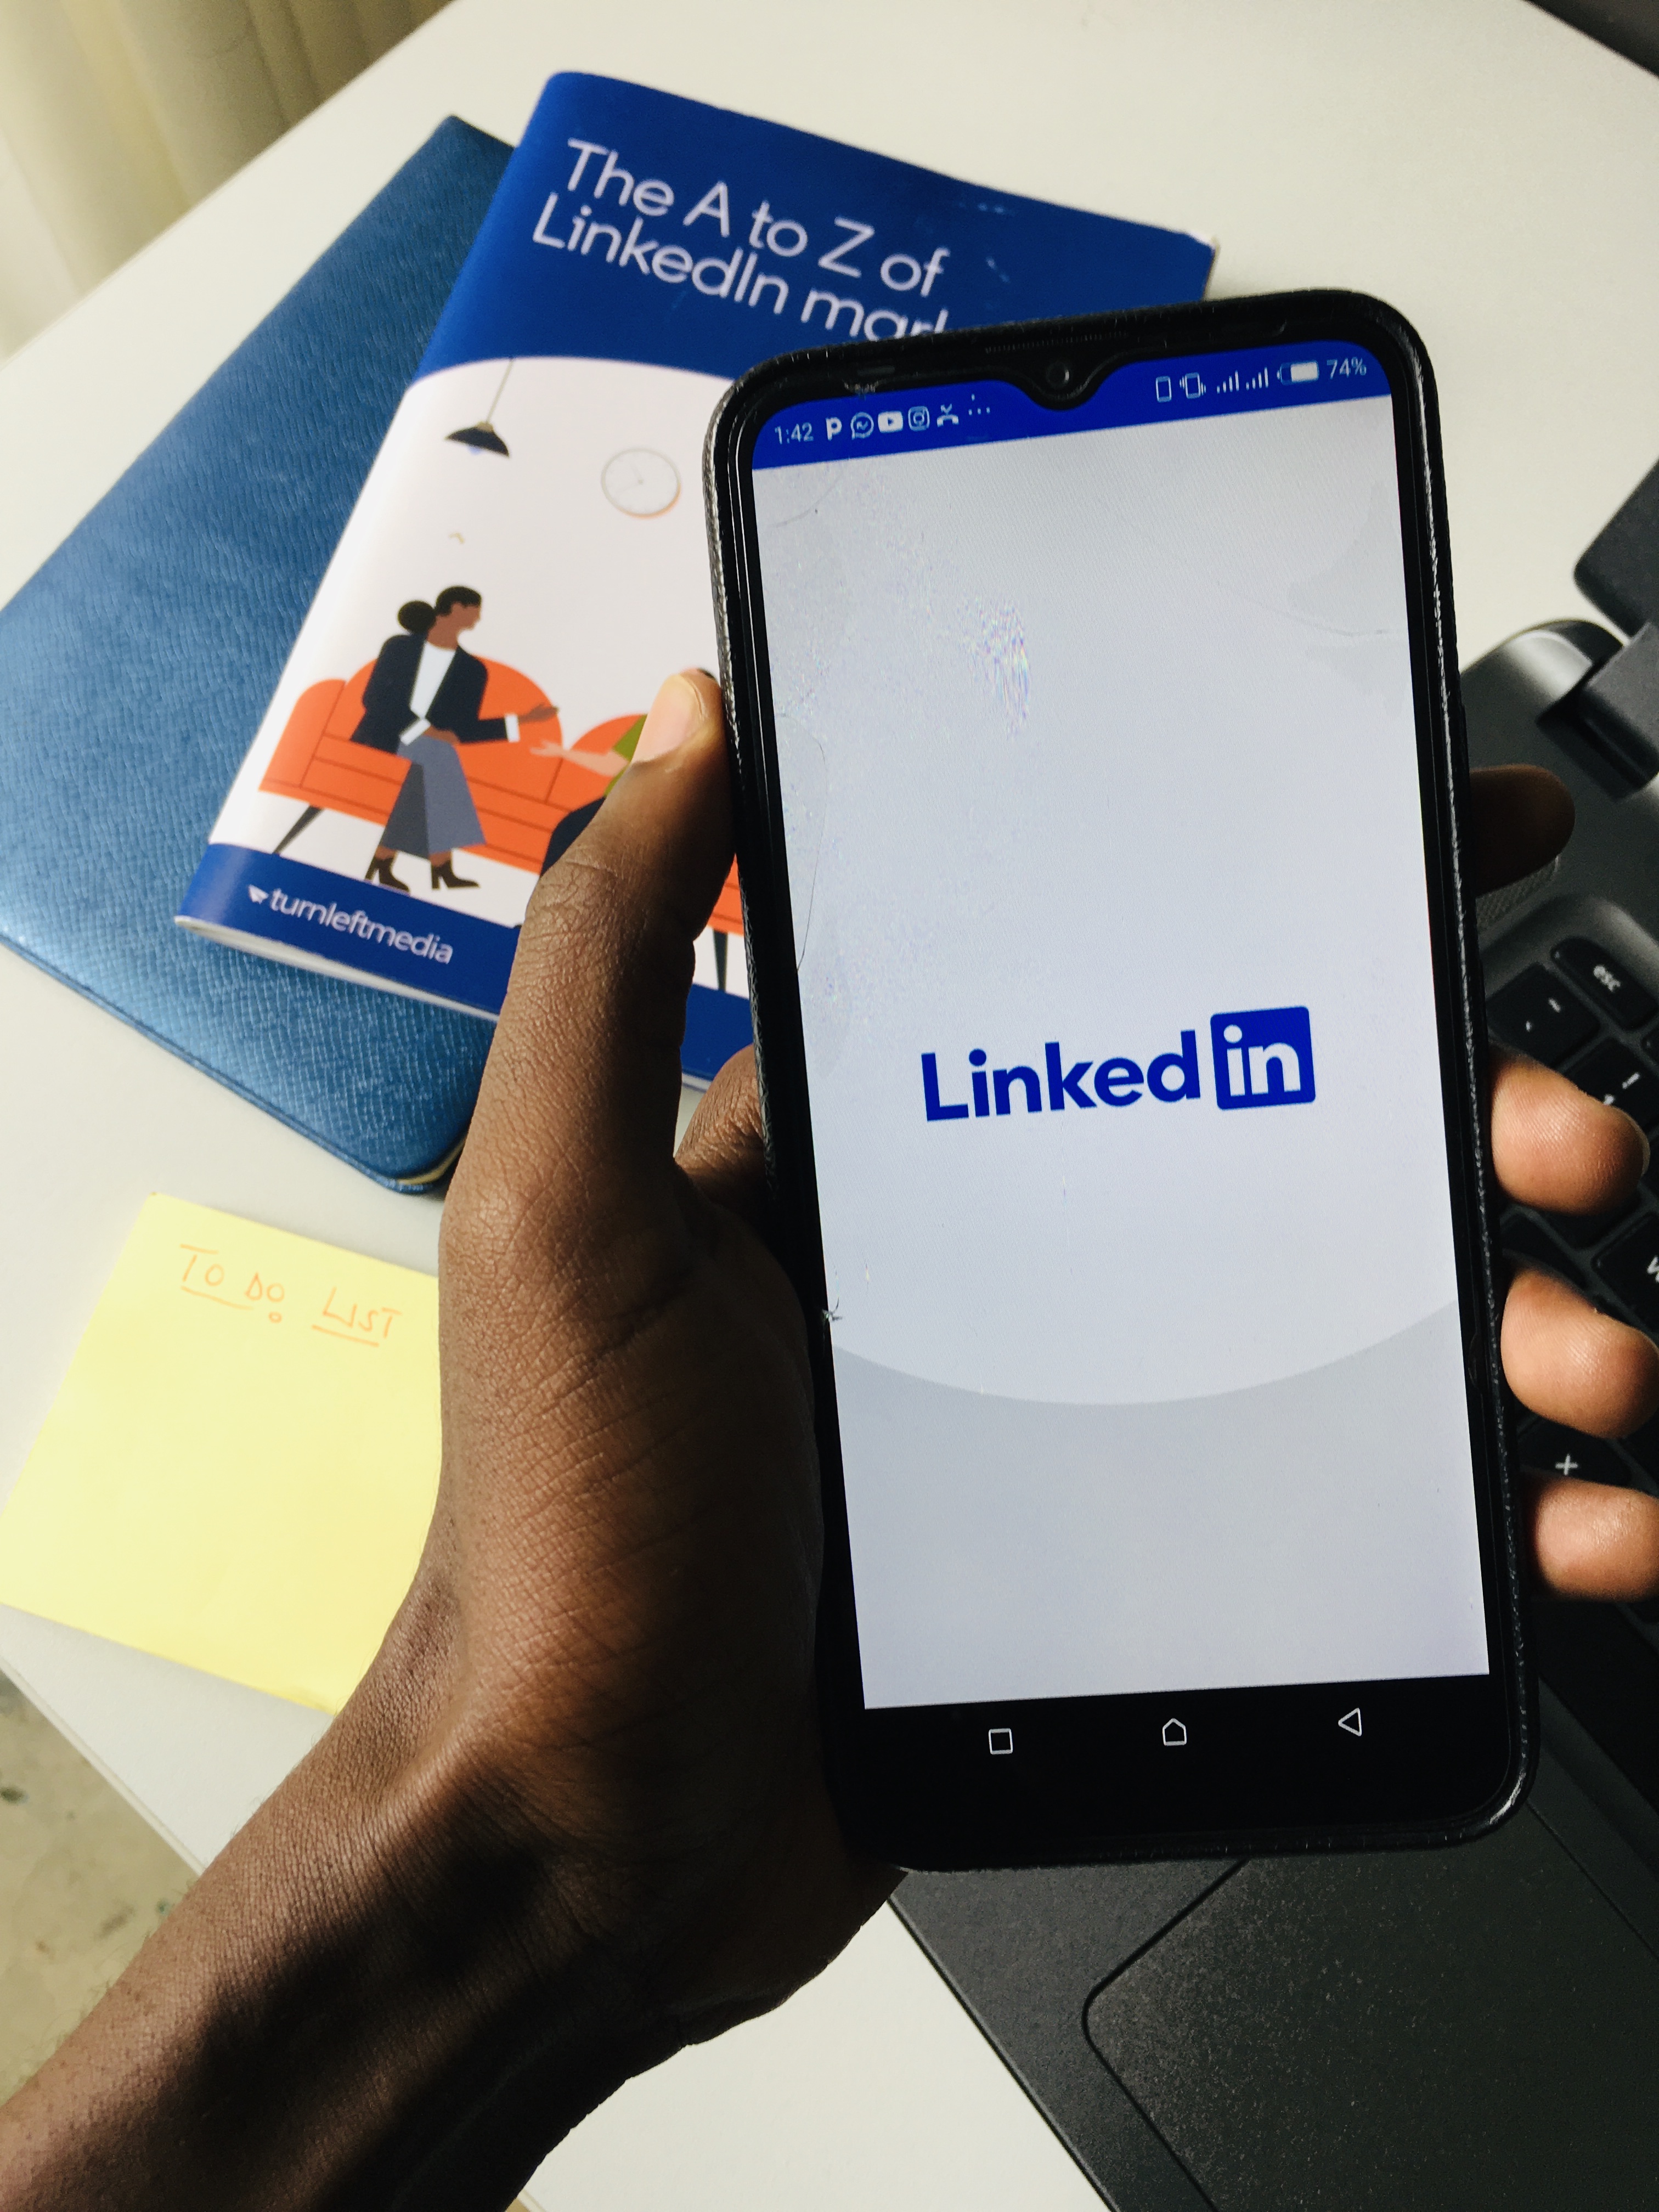 How do you use LinkedIn effectively and land new opportunities